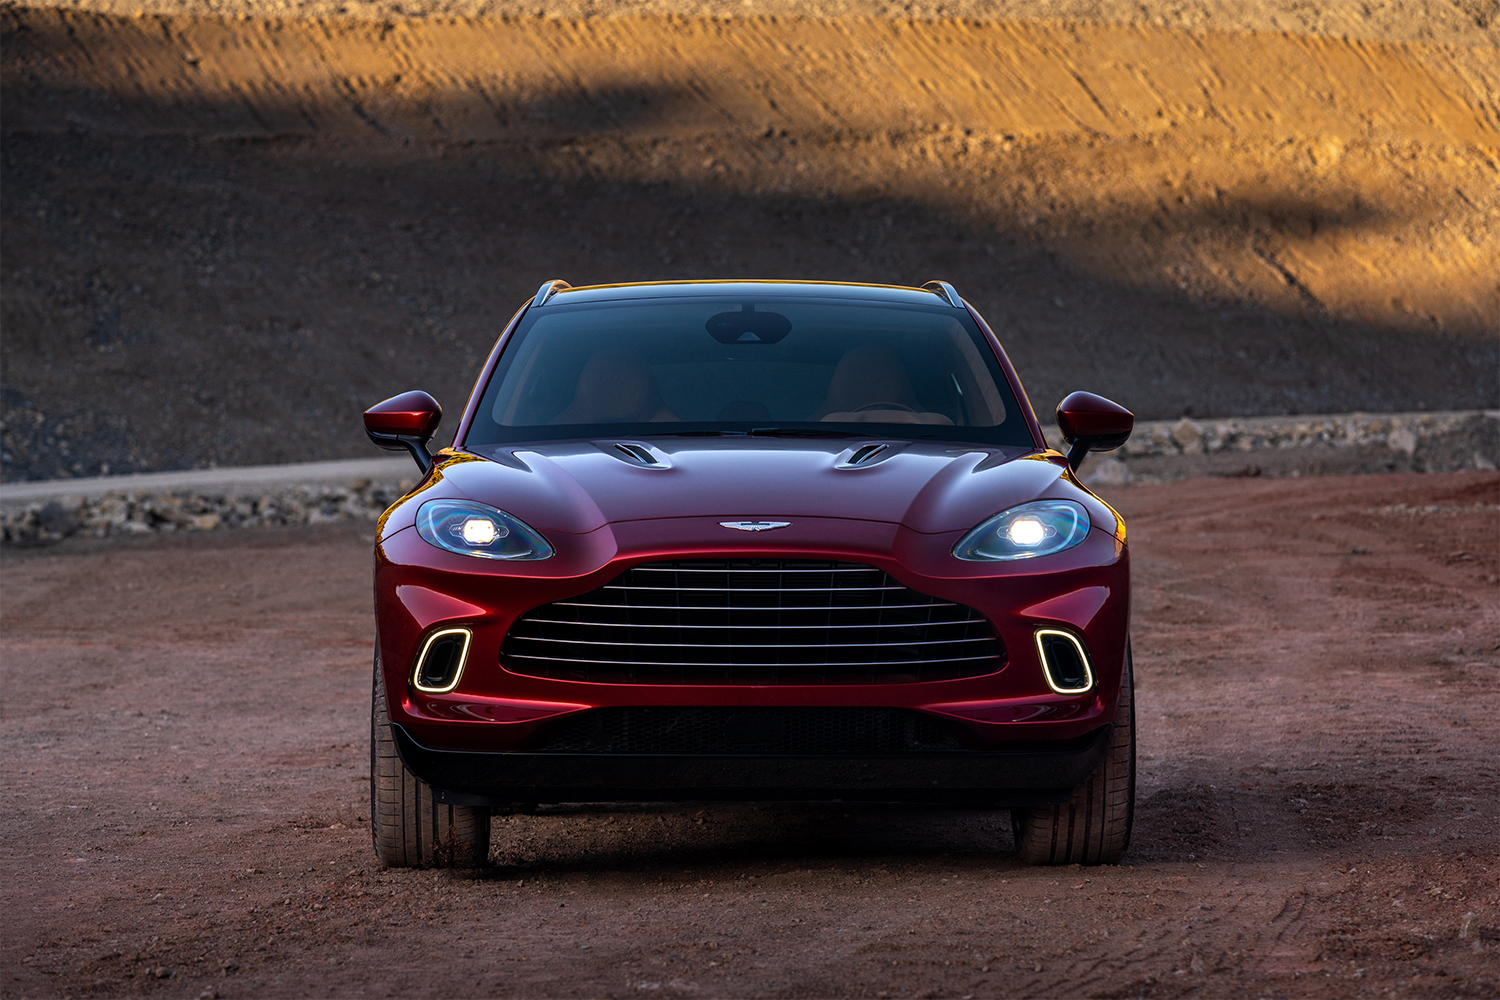 A red Aston Martin DBX, the British automaker's first SUV